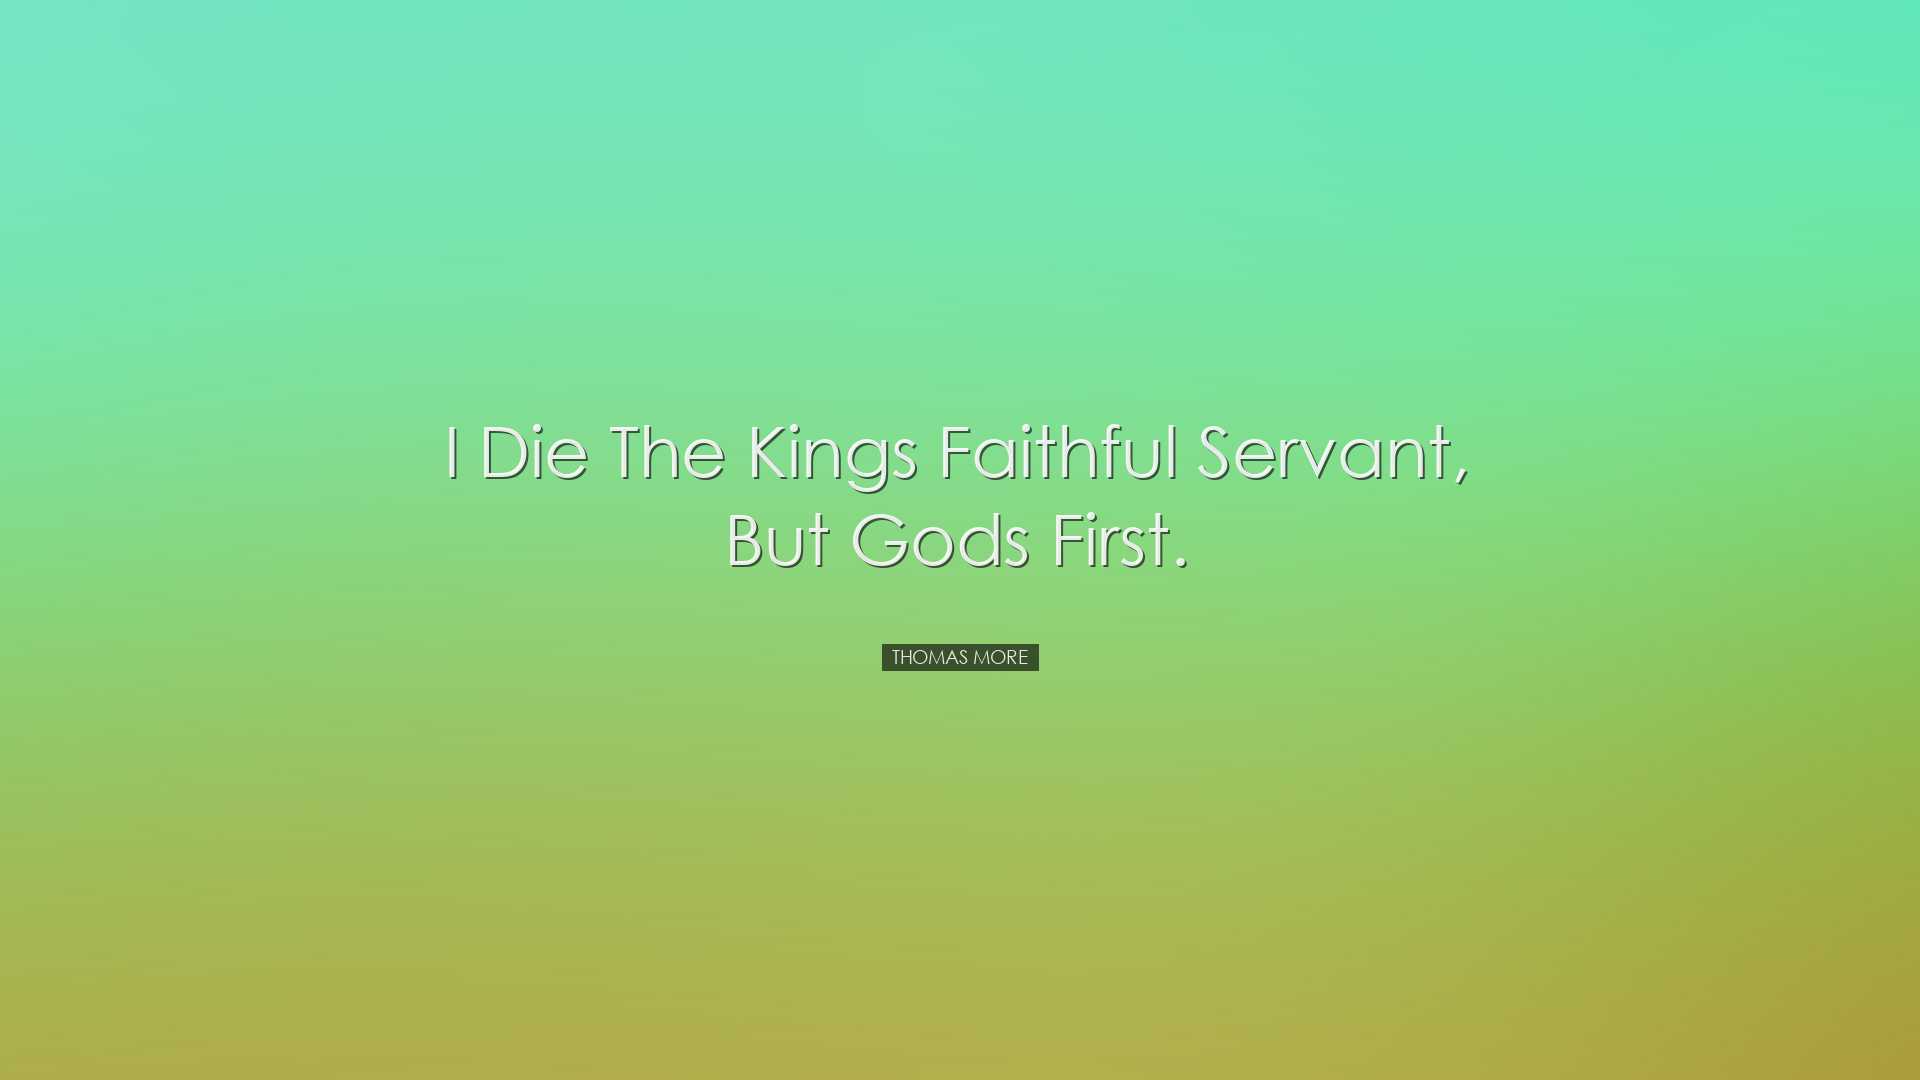 I die the kings faithful servant, but Gods first. - Thomas More